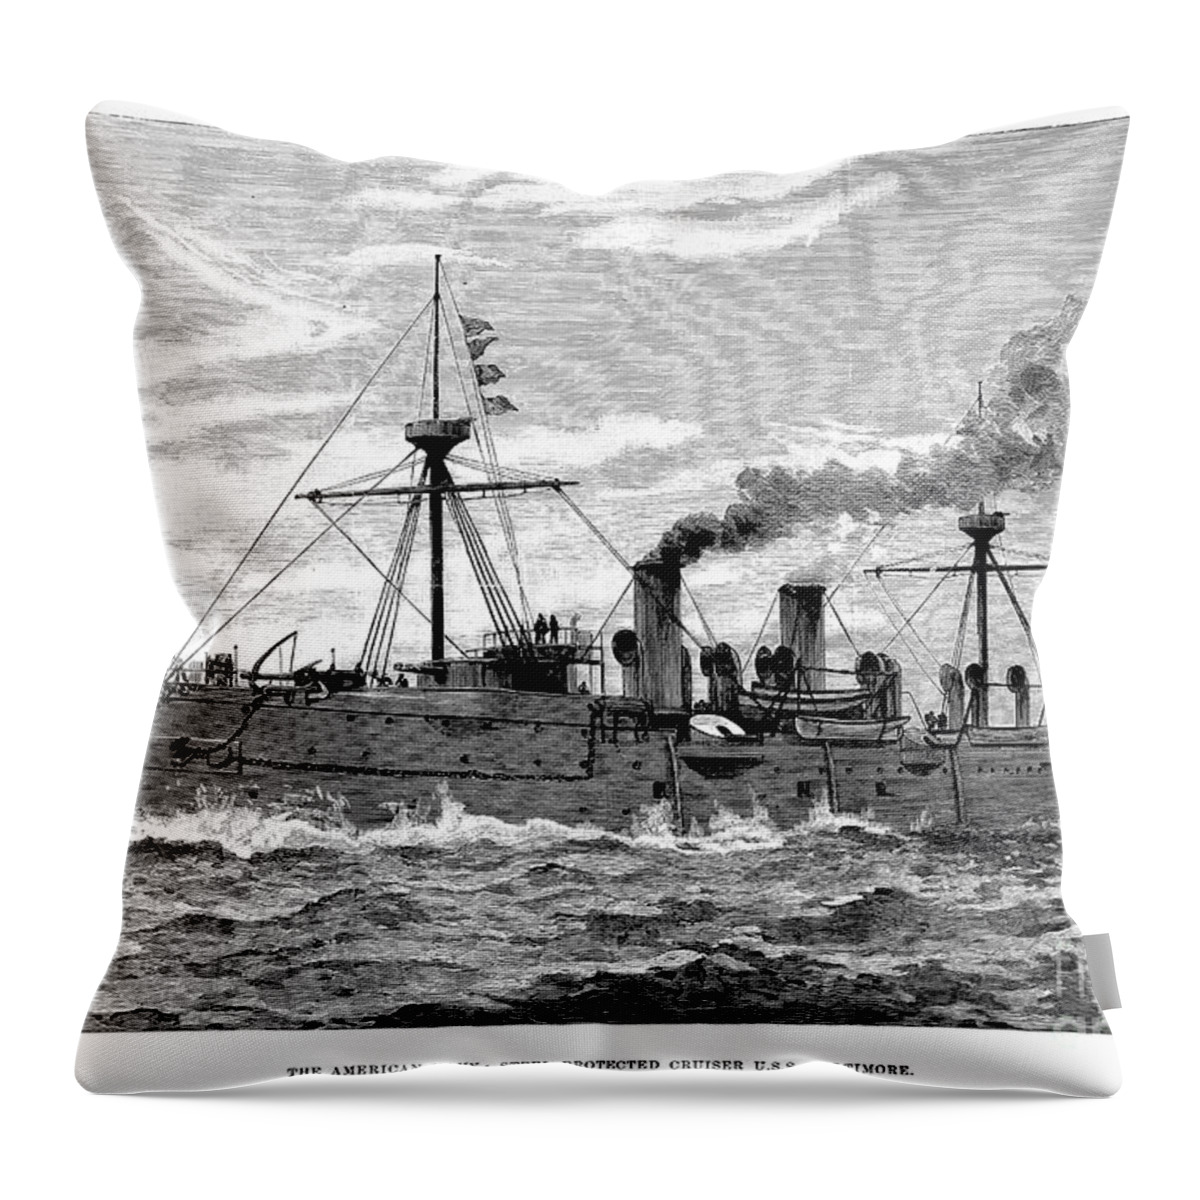 1890 Throw Pillow featuring the photograph Uss Baltimore, 1890 by Granger